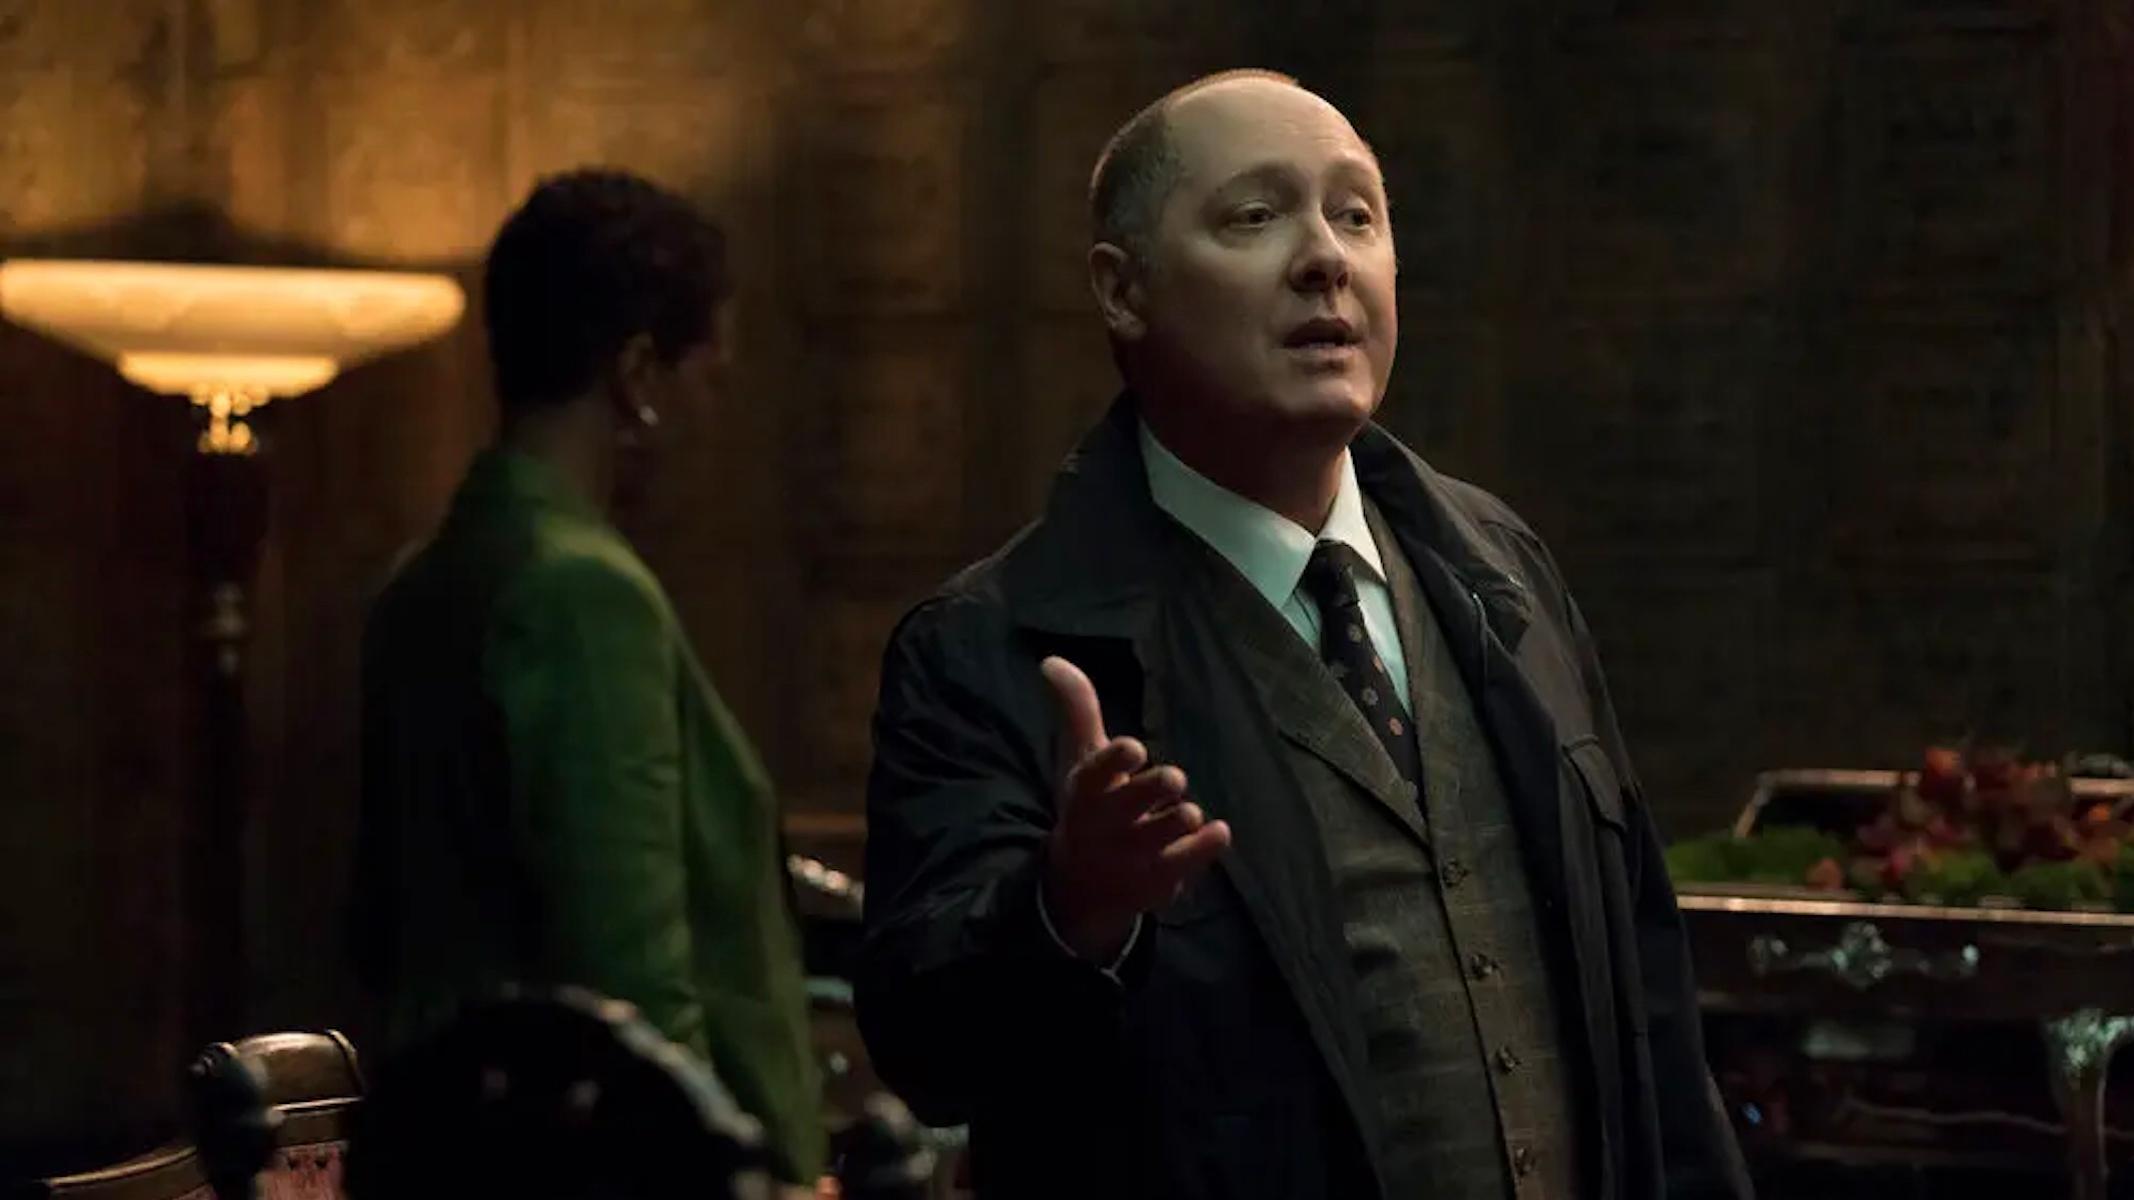 James Spader as Red in 'The Blacklist'